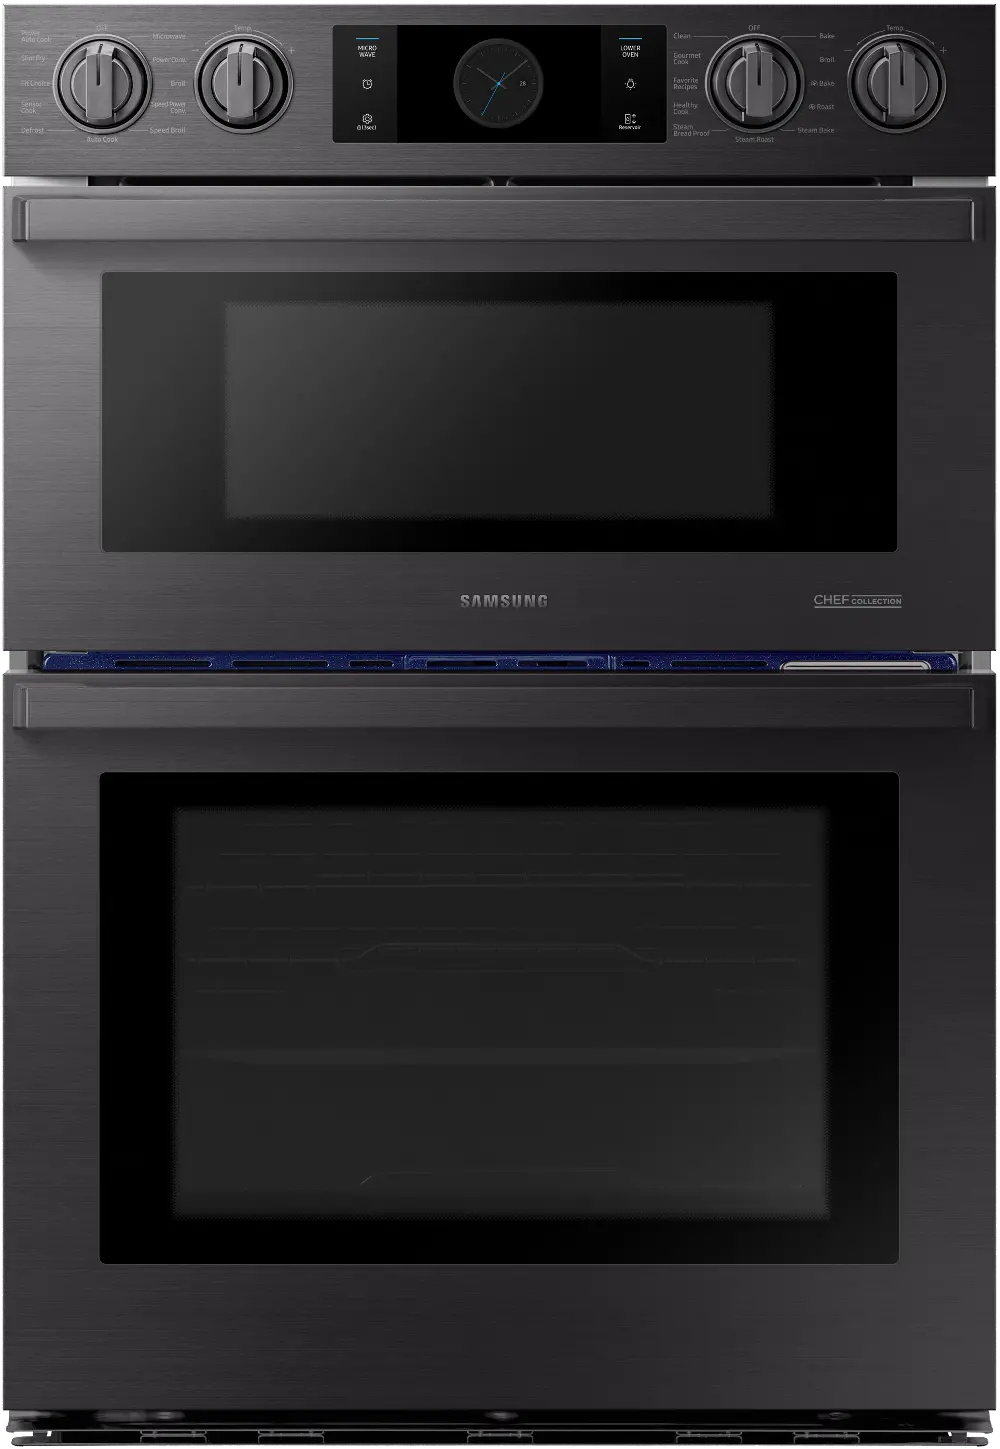 NQ70M9770DM Samsung Chef 30 Inch Combination Wall Oven with Microwave - 7.0 cu. ft. Matte Black Stainless Steel-1